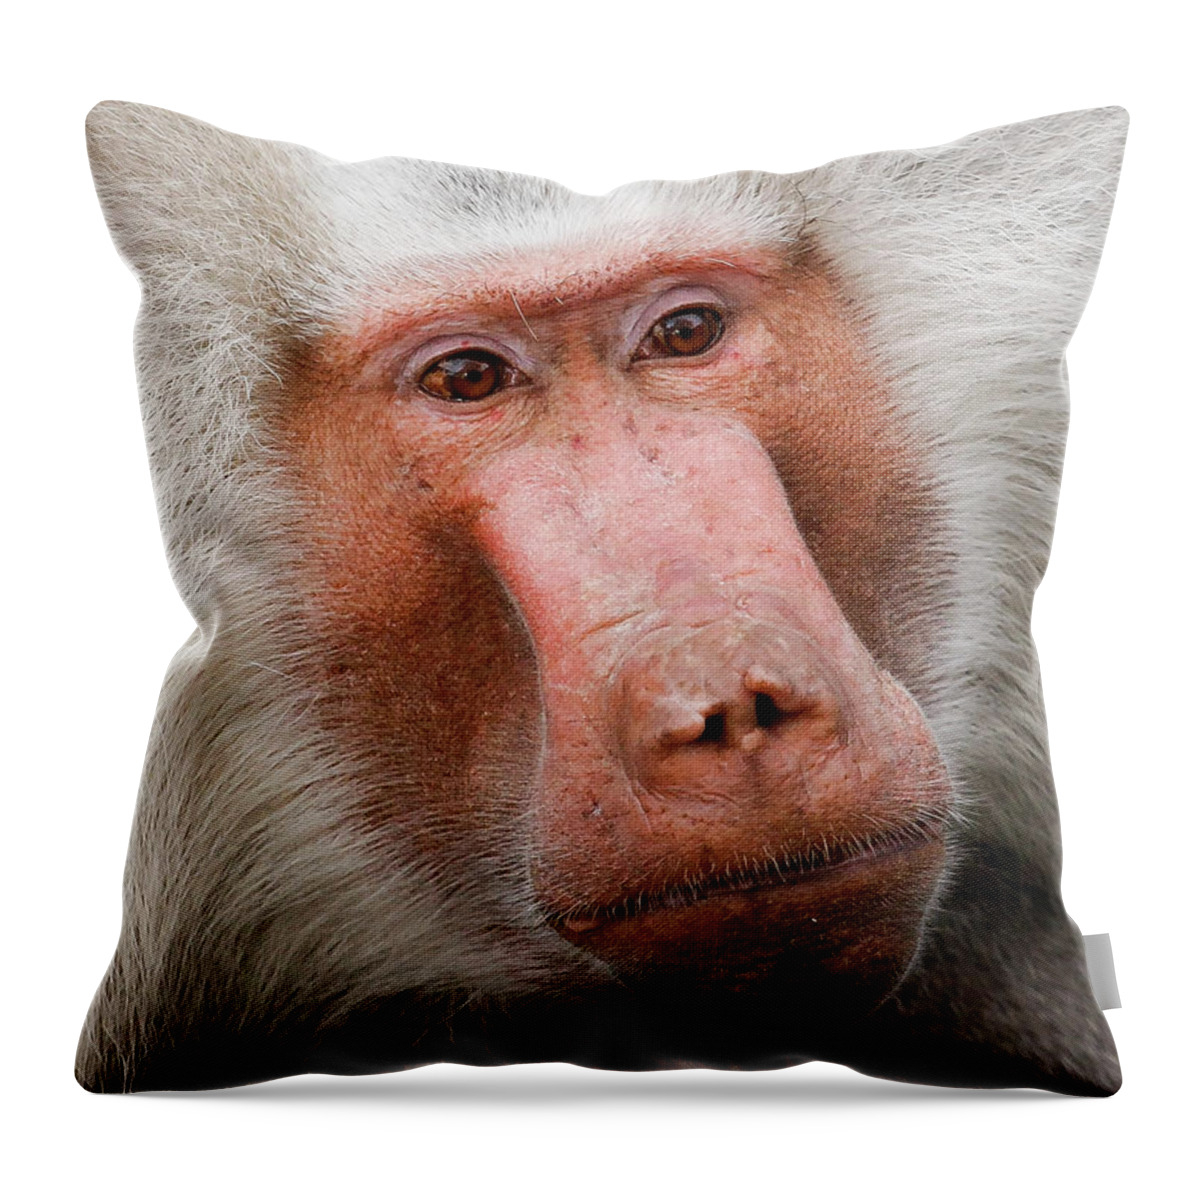 Japanese Snow Monkey Throw Pillow featuring the photograph Japanese Snow Monkey #2 by David Morehead